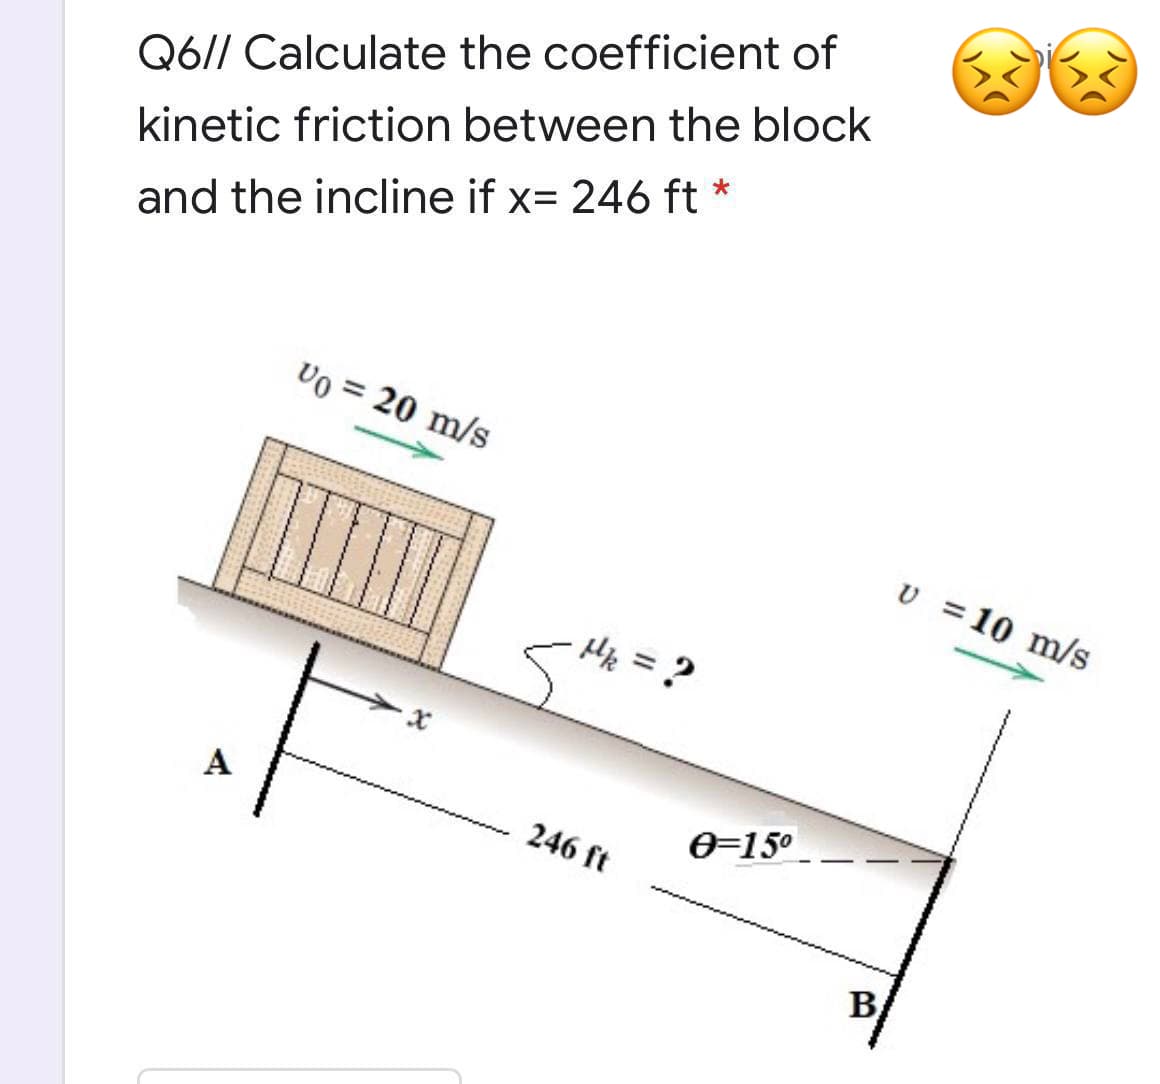 Q6// Calculate the coefficient of
kinetic friction between the block
and the incline if x= 246 ft *
Vo = 20 m/s
v =10 m/s
Hf = ?
A
246 ft
e=15°
B
